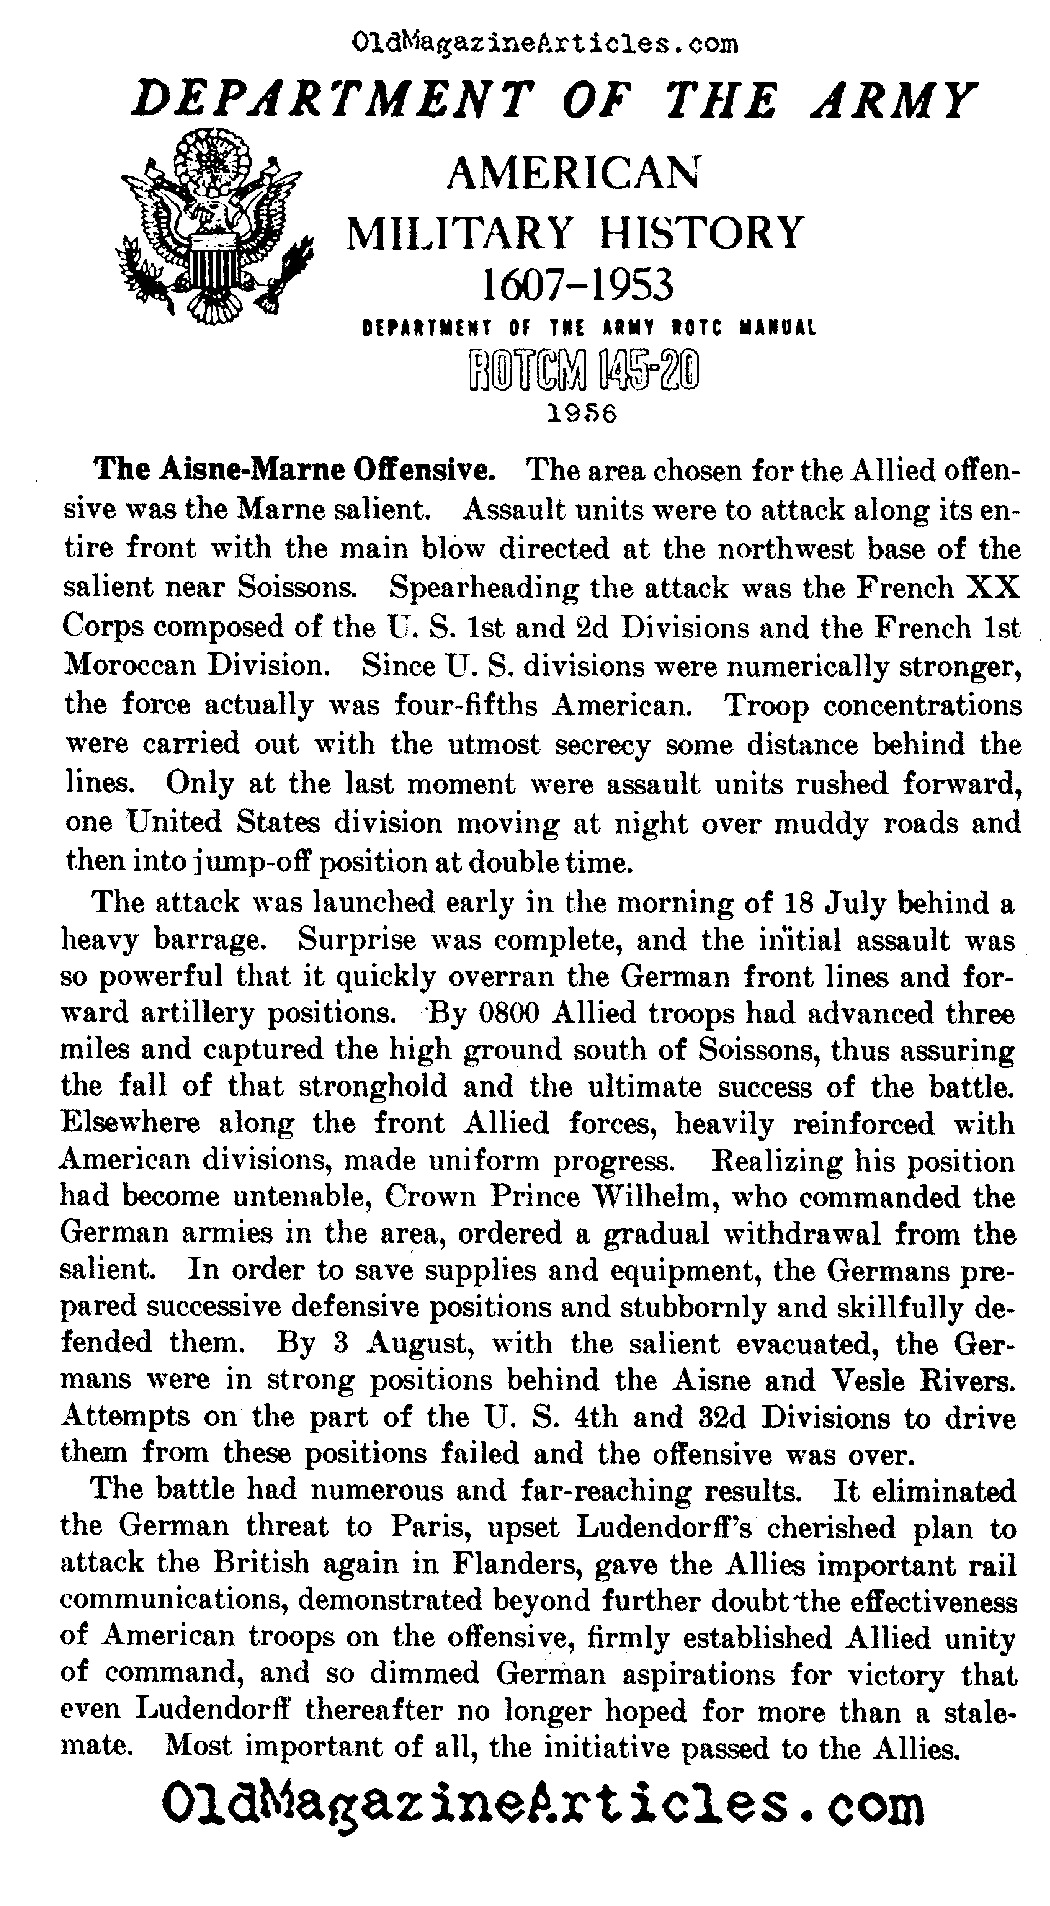 Summing Up the Aisne-Marne Offensive (Dept. of the Army, 1956)